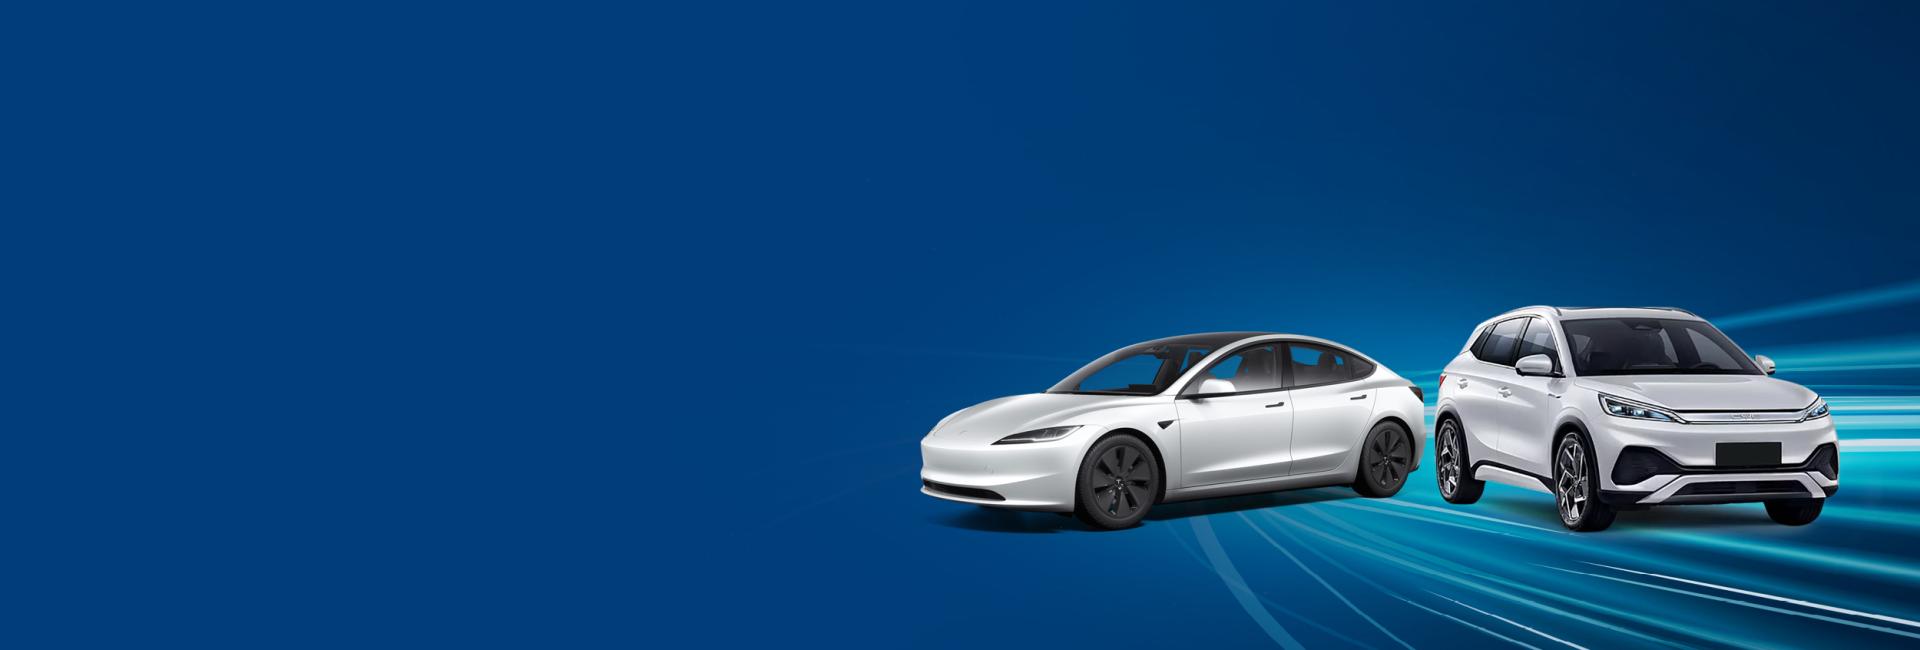 electric vehicle banner